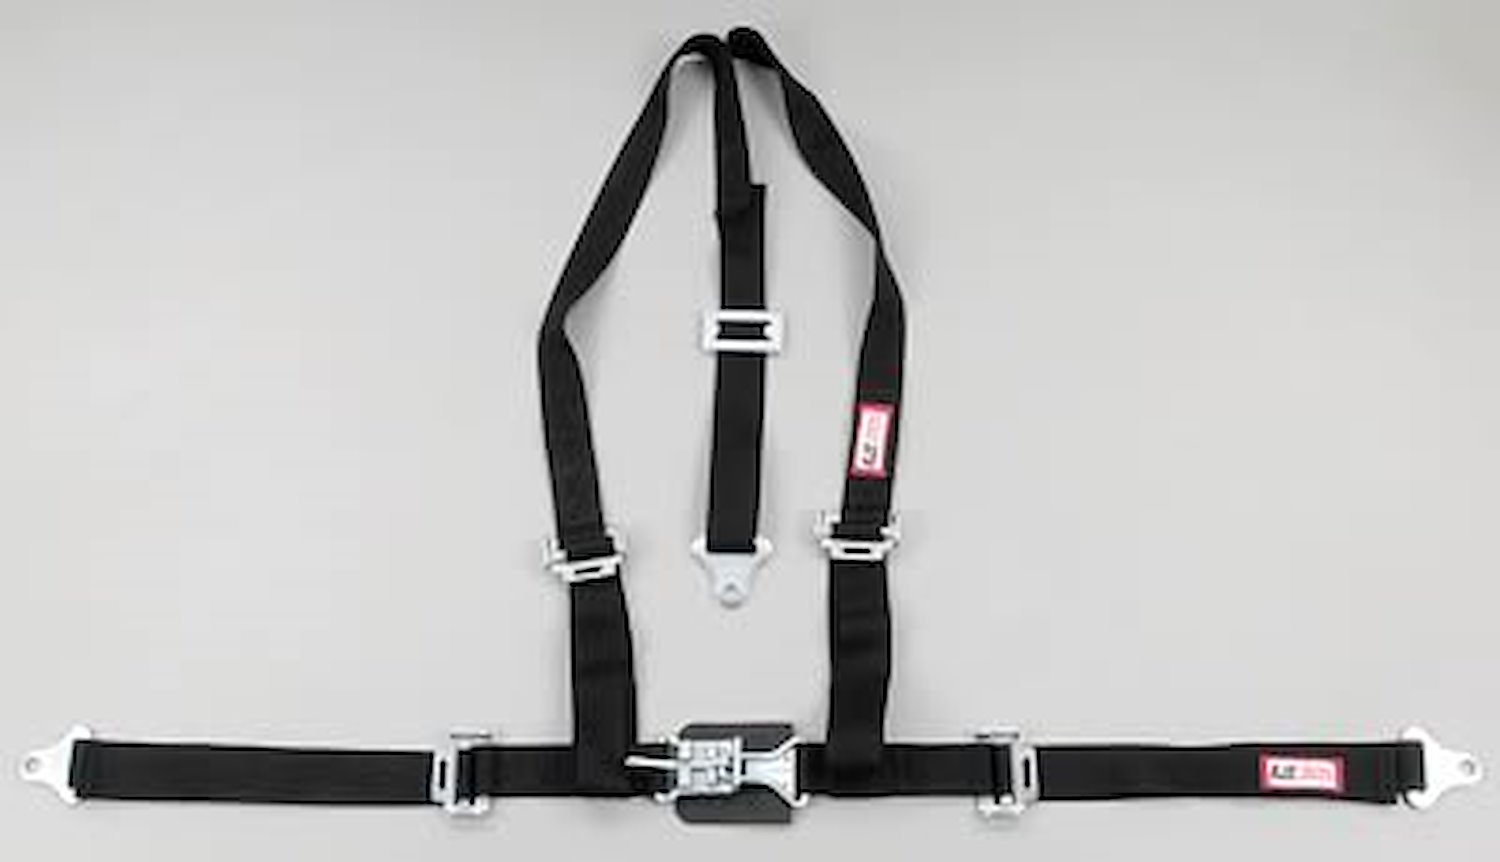 NON-SFI L&L HARNESS 2 PULL UP Lap Belt SEWN IN 2 S.H. V ROLL BAR Mount ALL WRAP ENDS BLACK